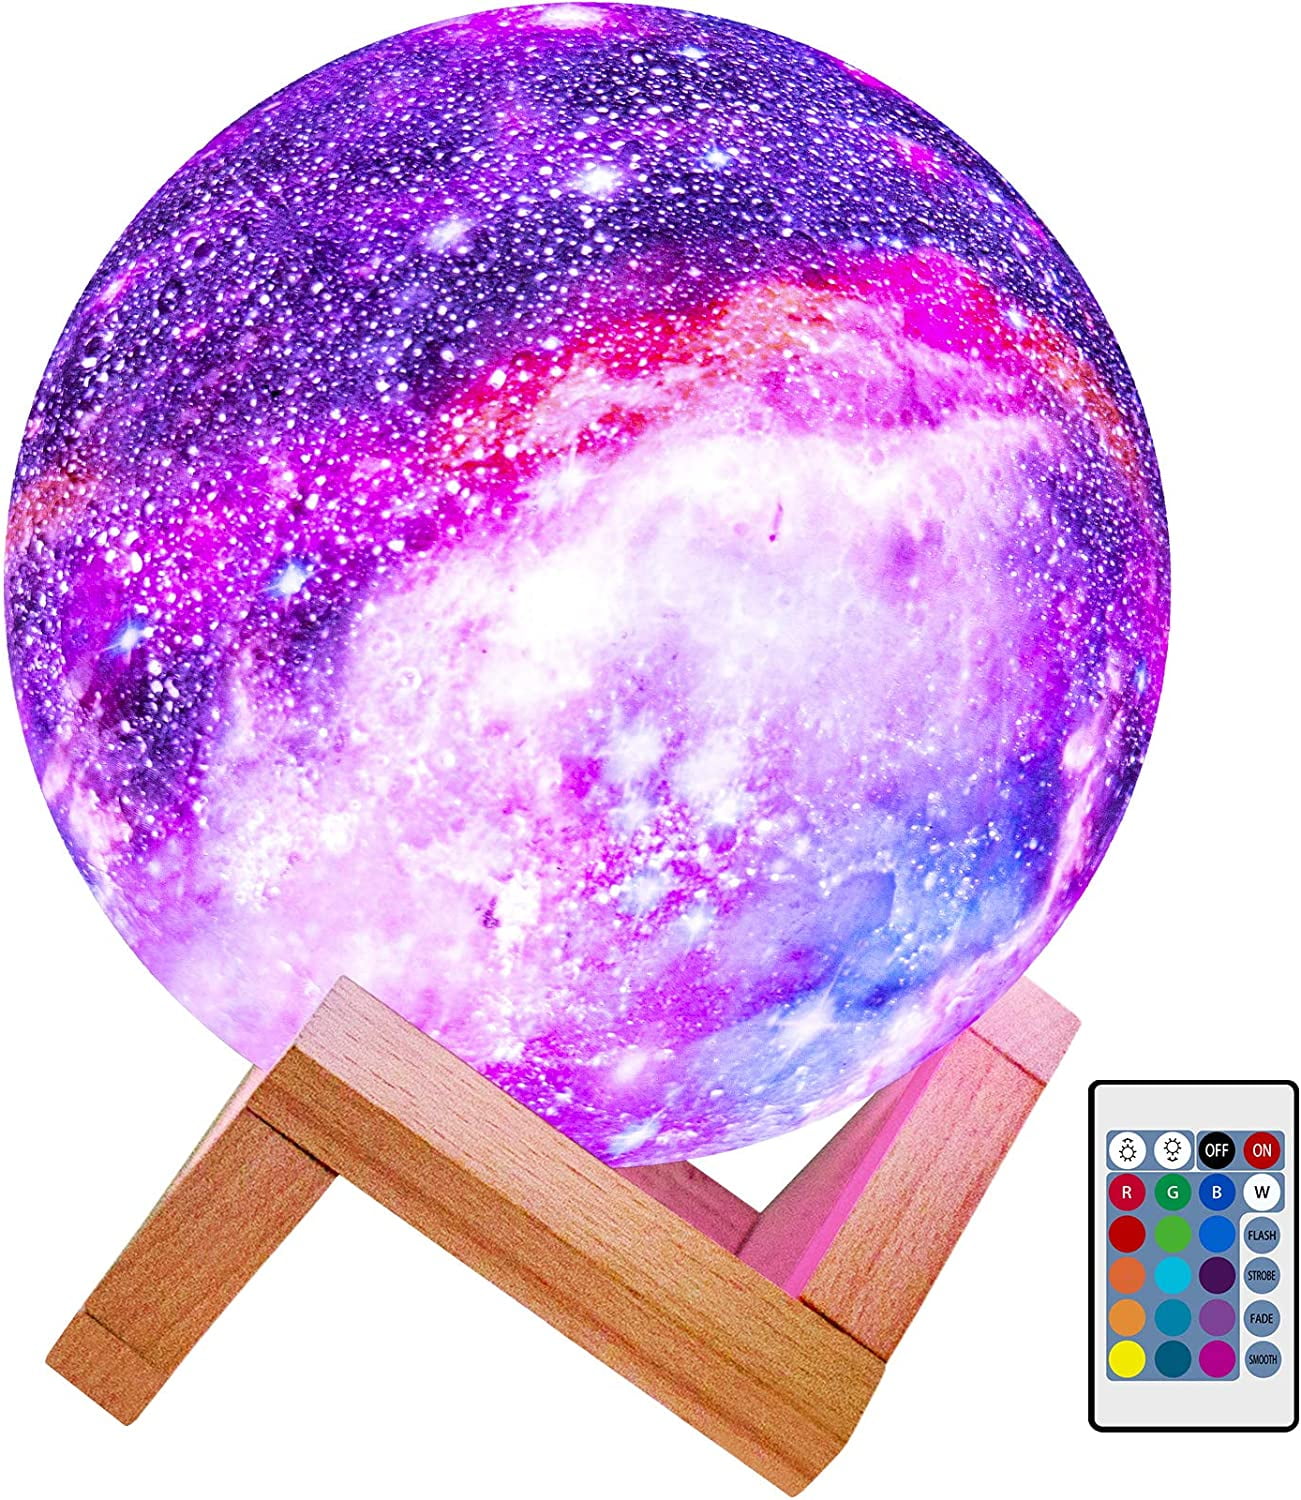 3D Print Galaxy Star LED Moon Lamp 16 Colors Changing Touch Desk Night Lights UK 